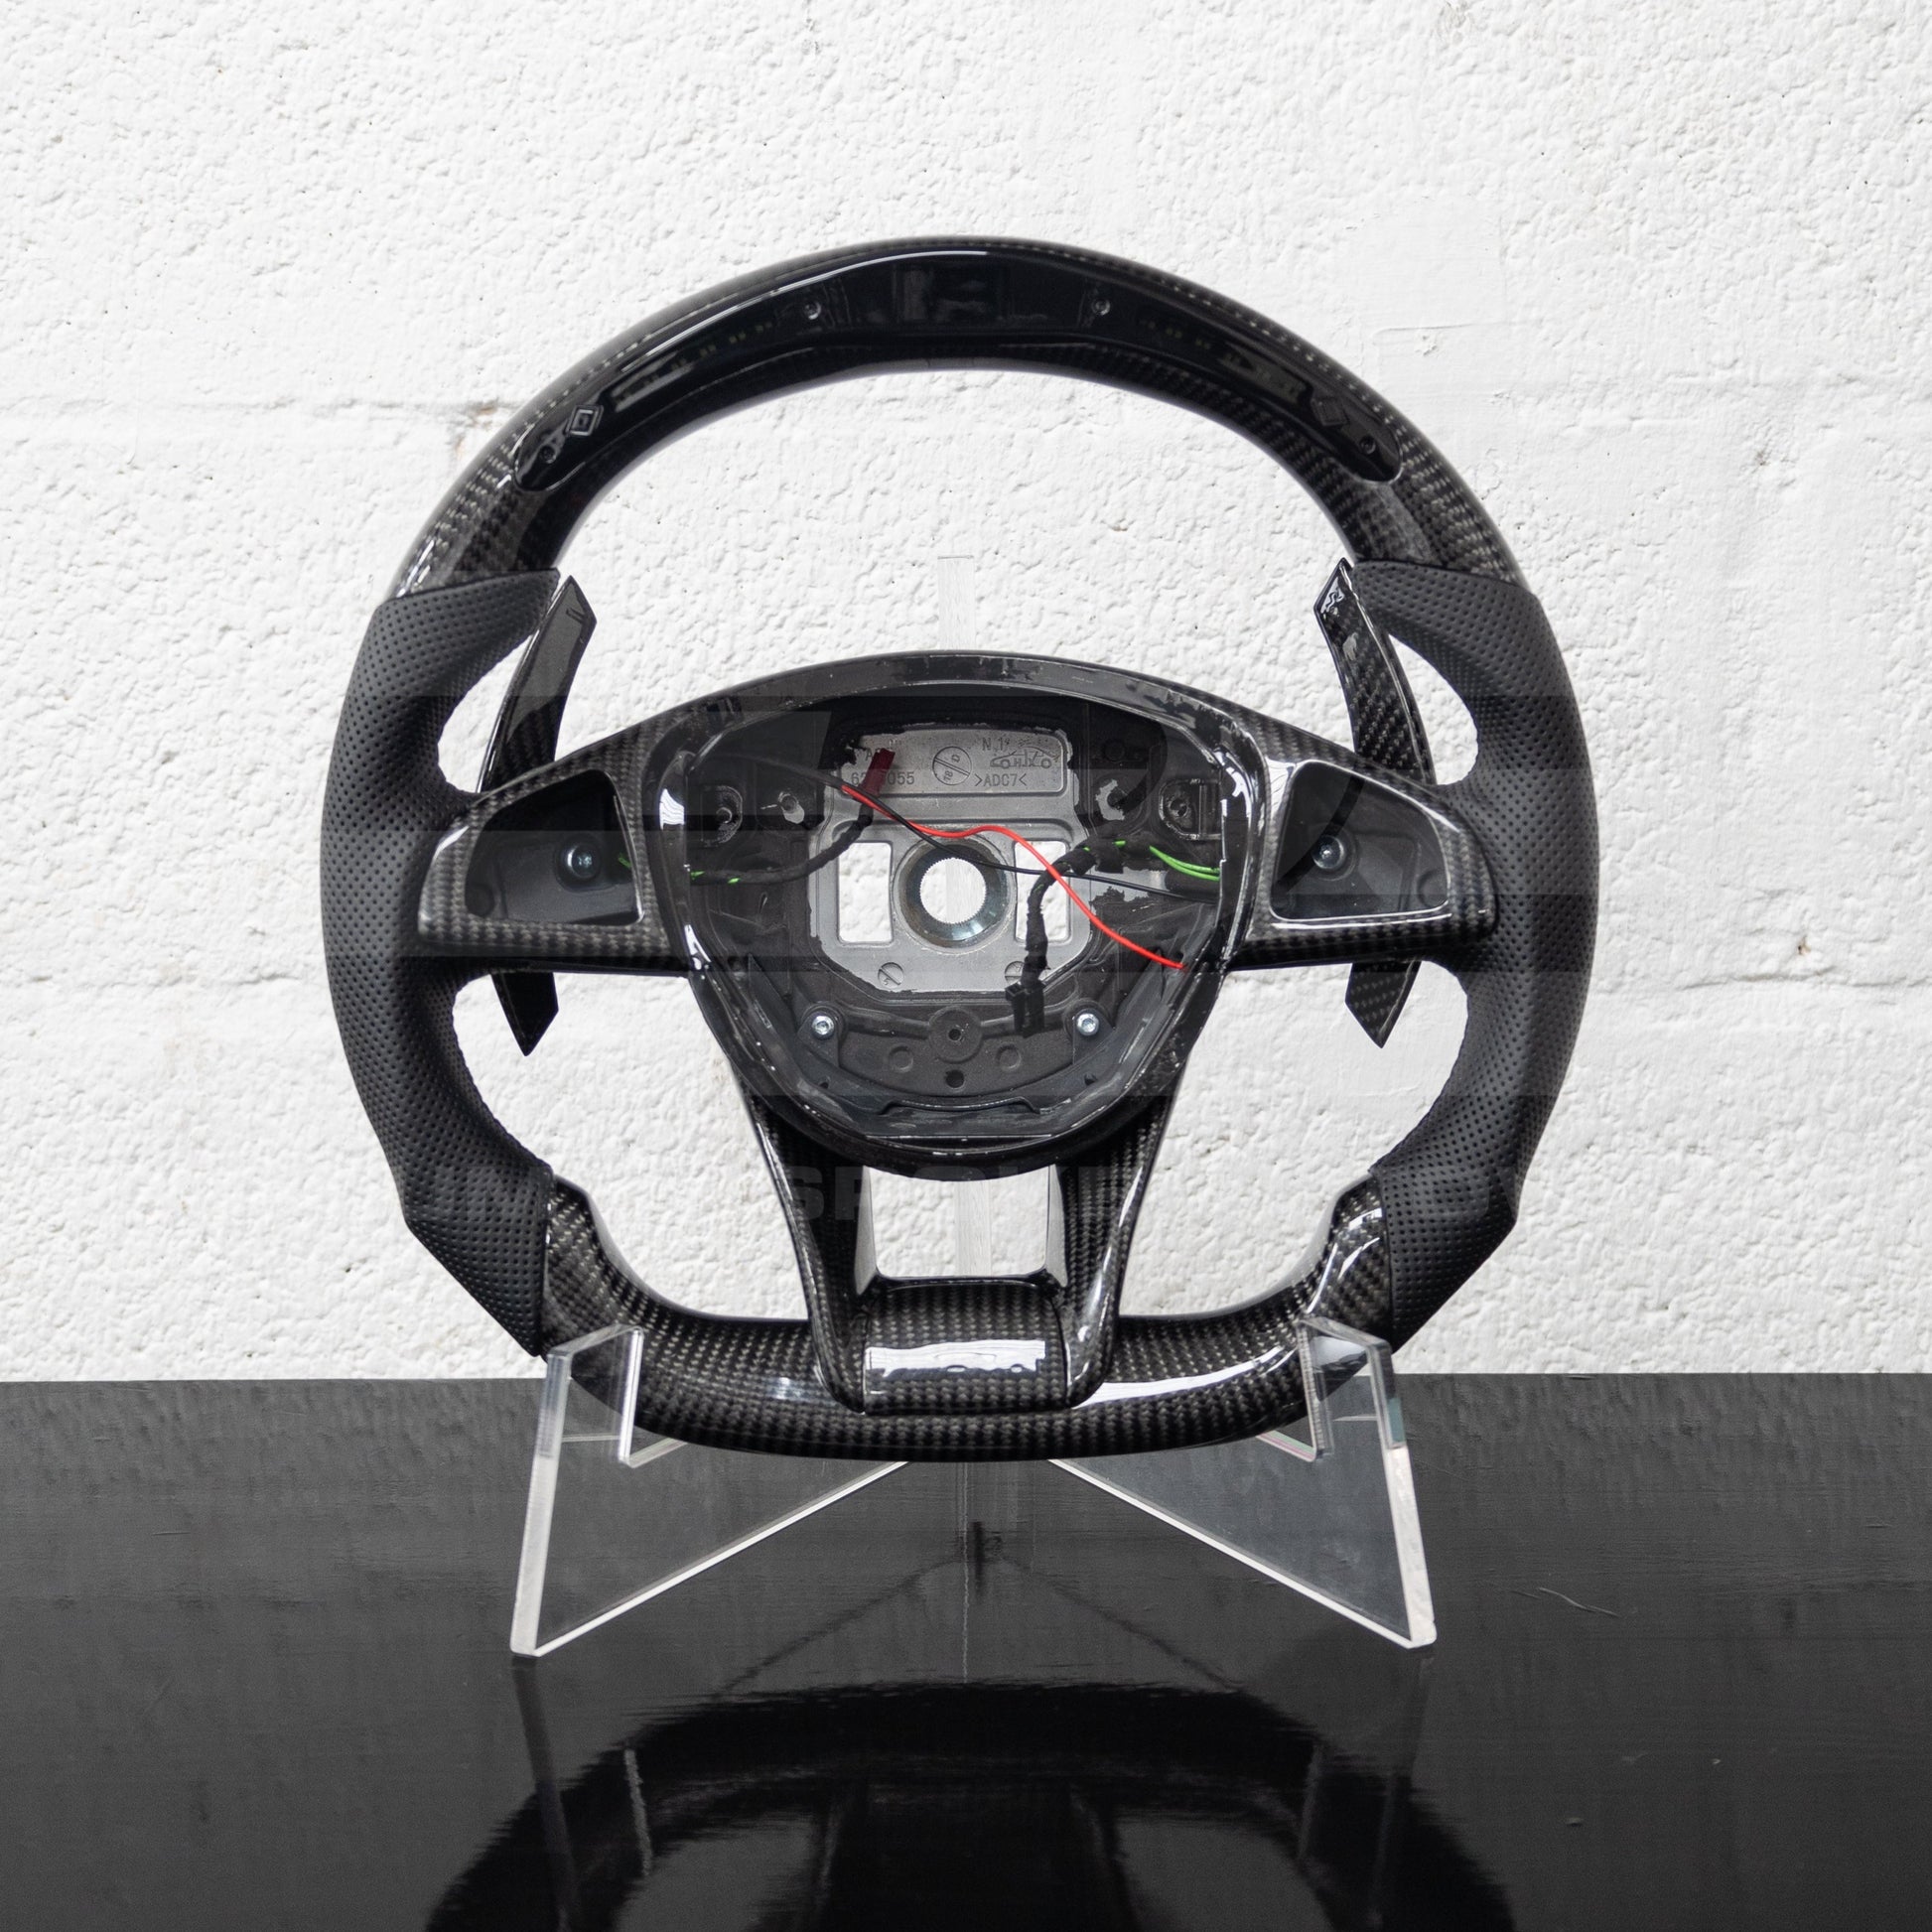 Mercedes Carbon Perforated Leather Steering Wheel